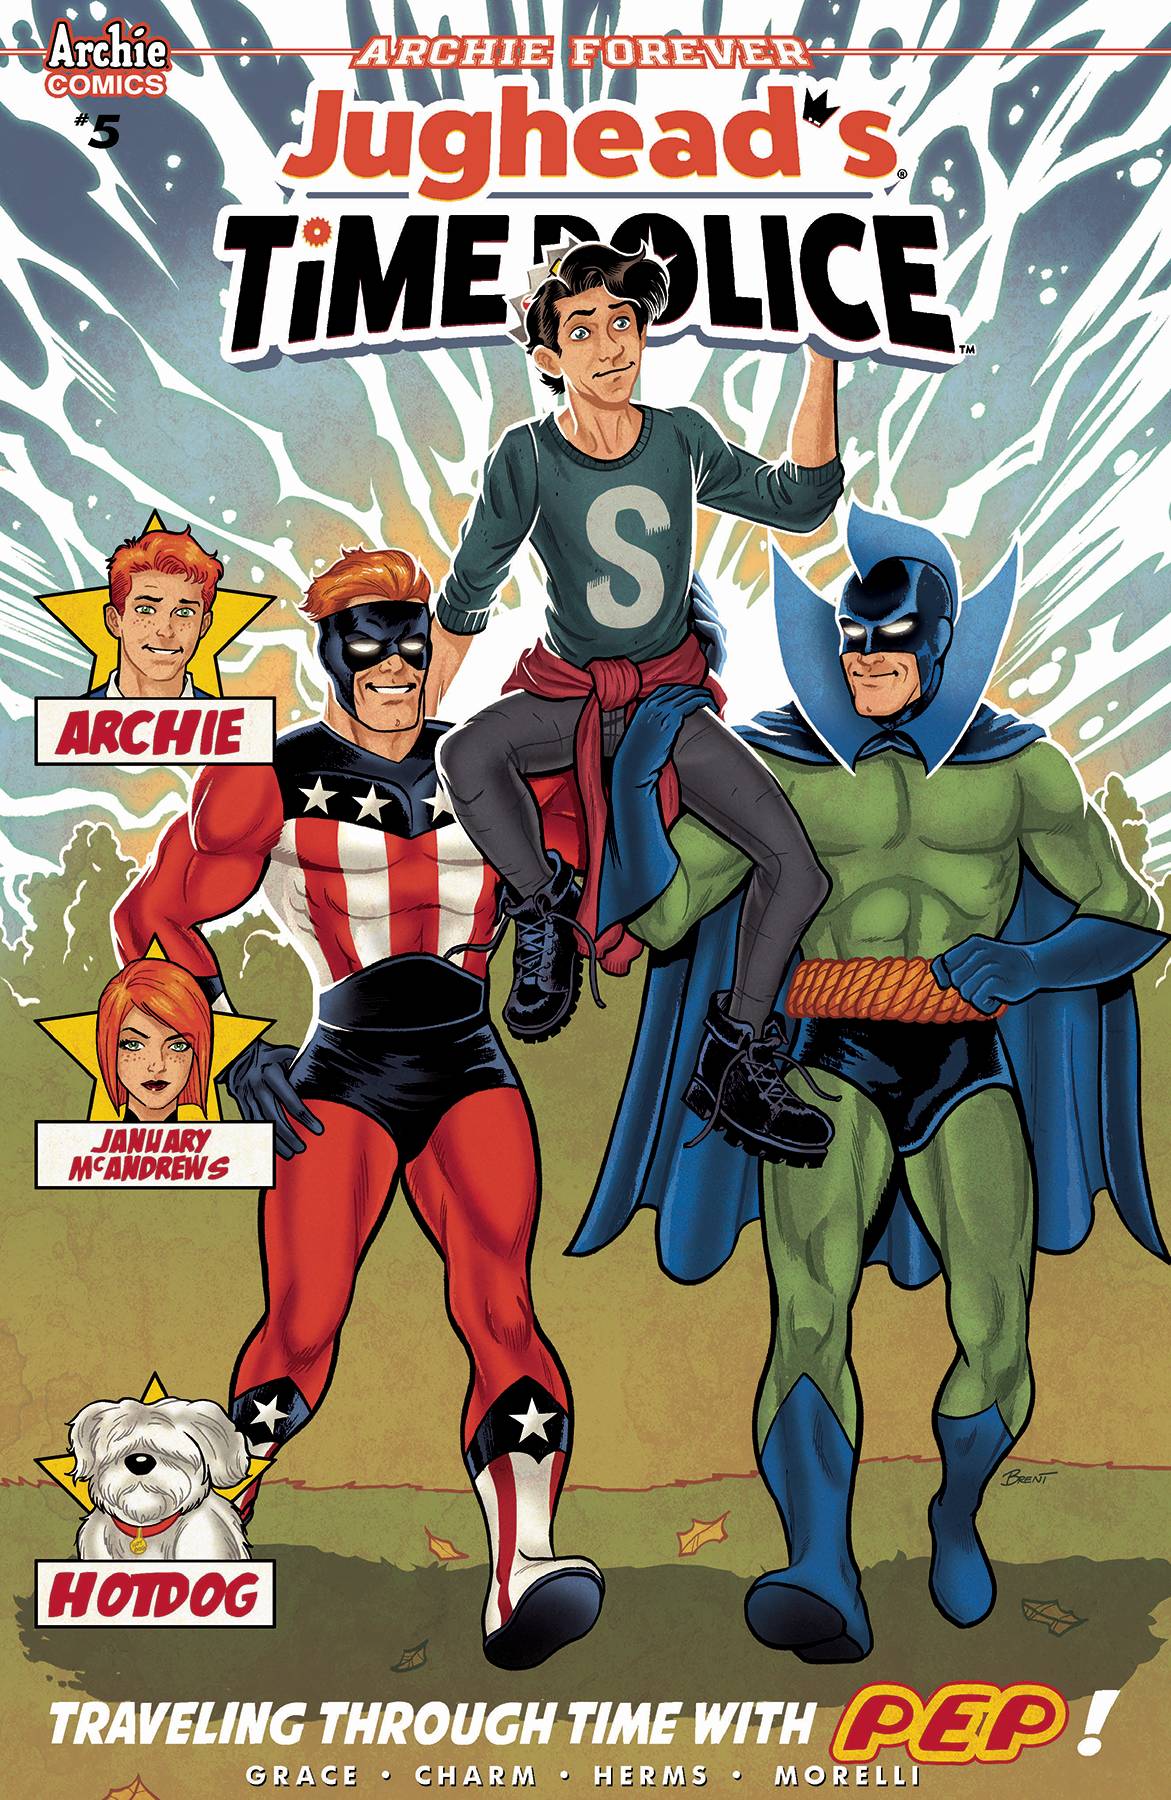 Jughead Time Police #5 Cover B Schoonover (Of 5)